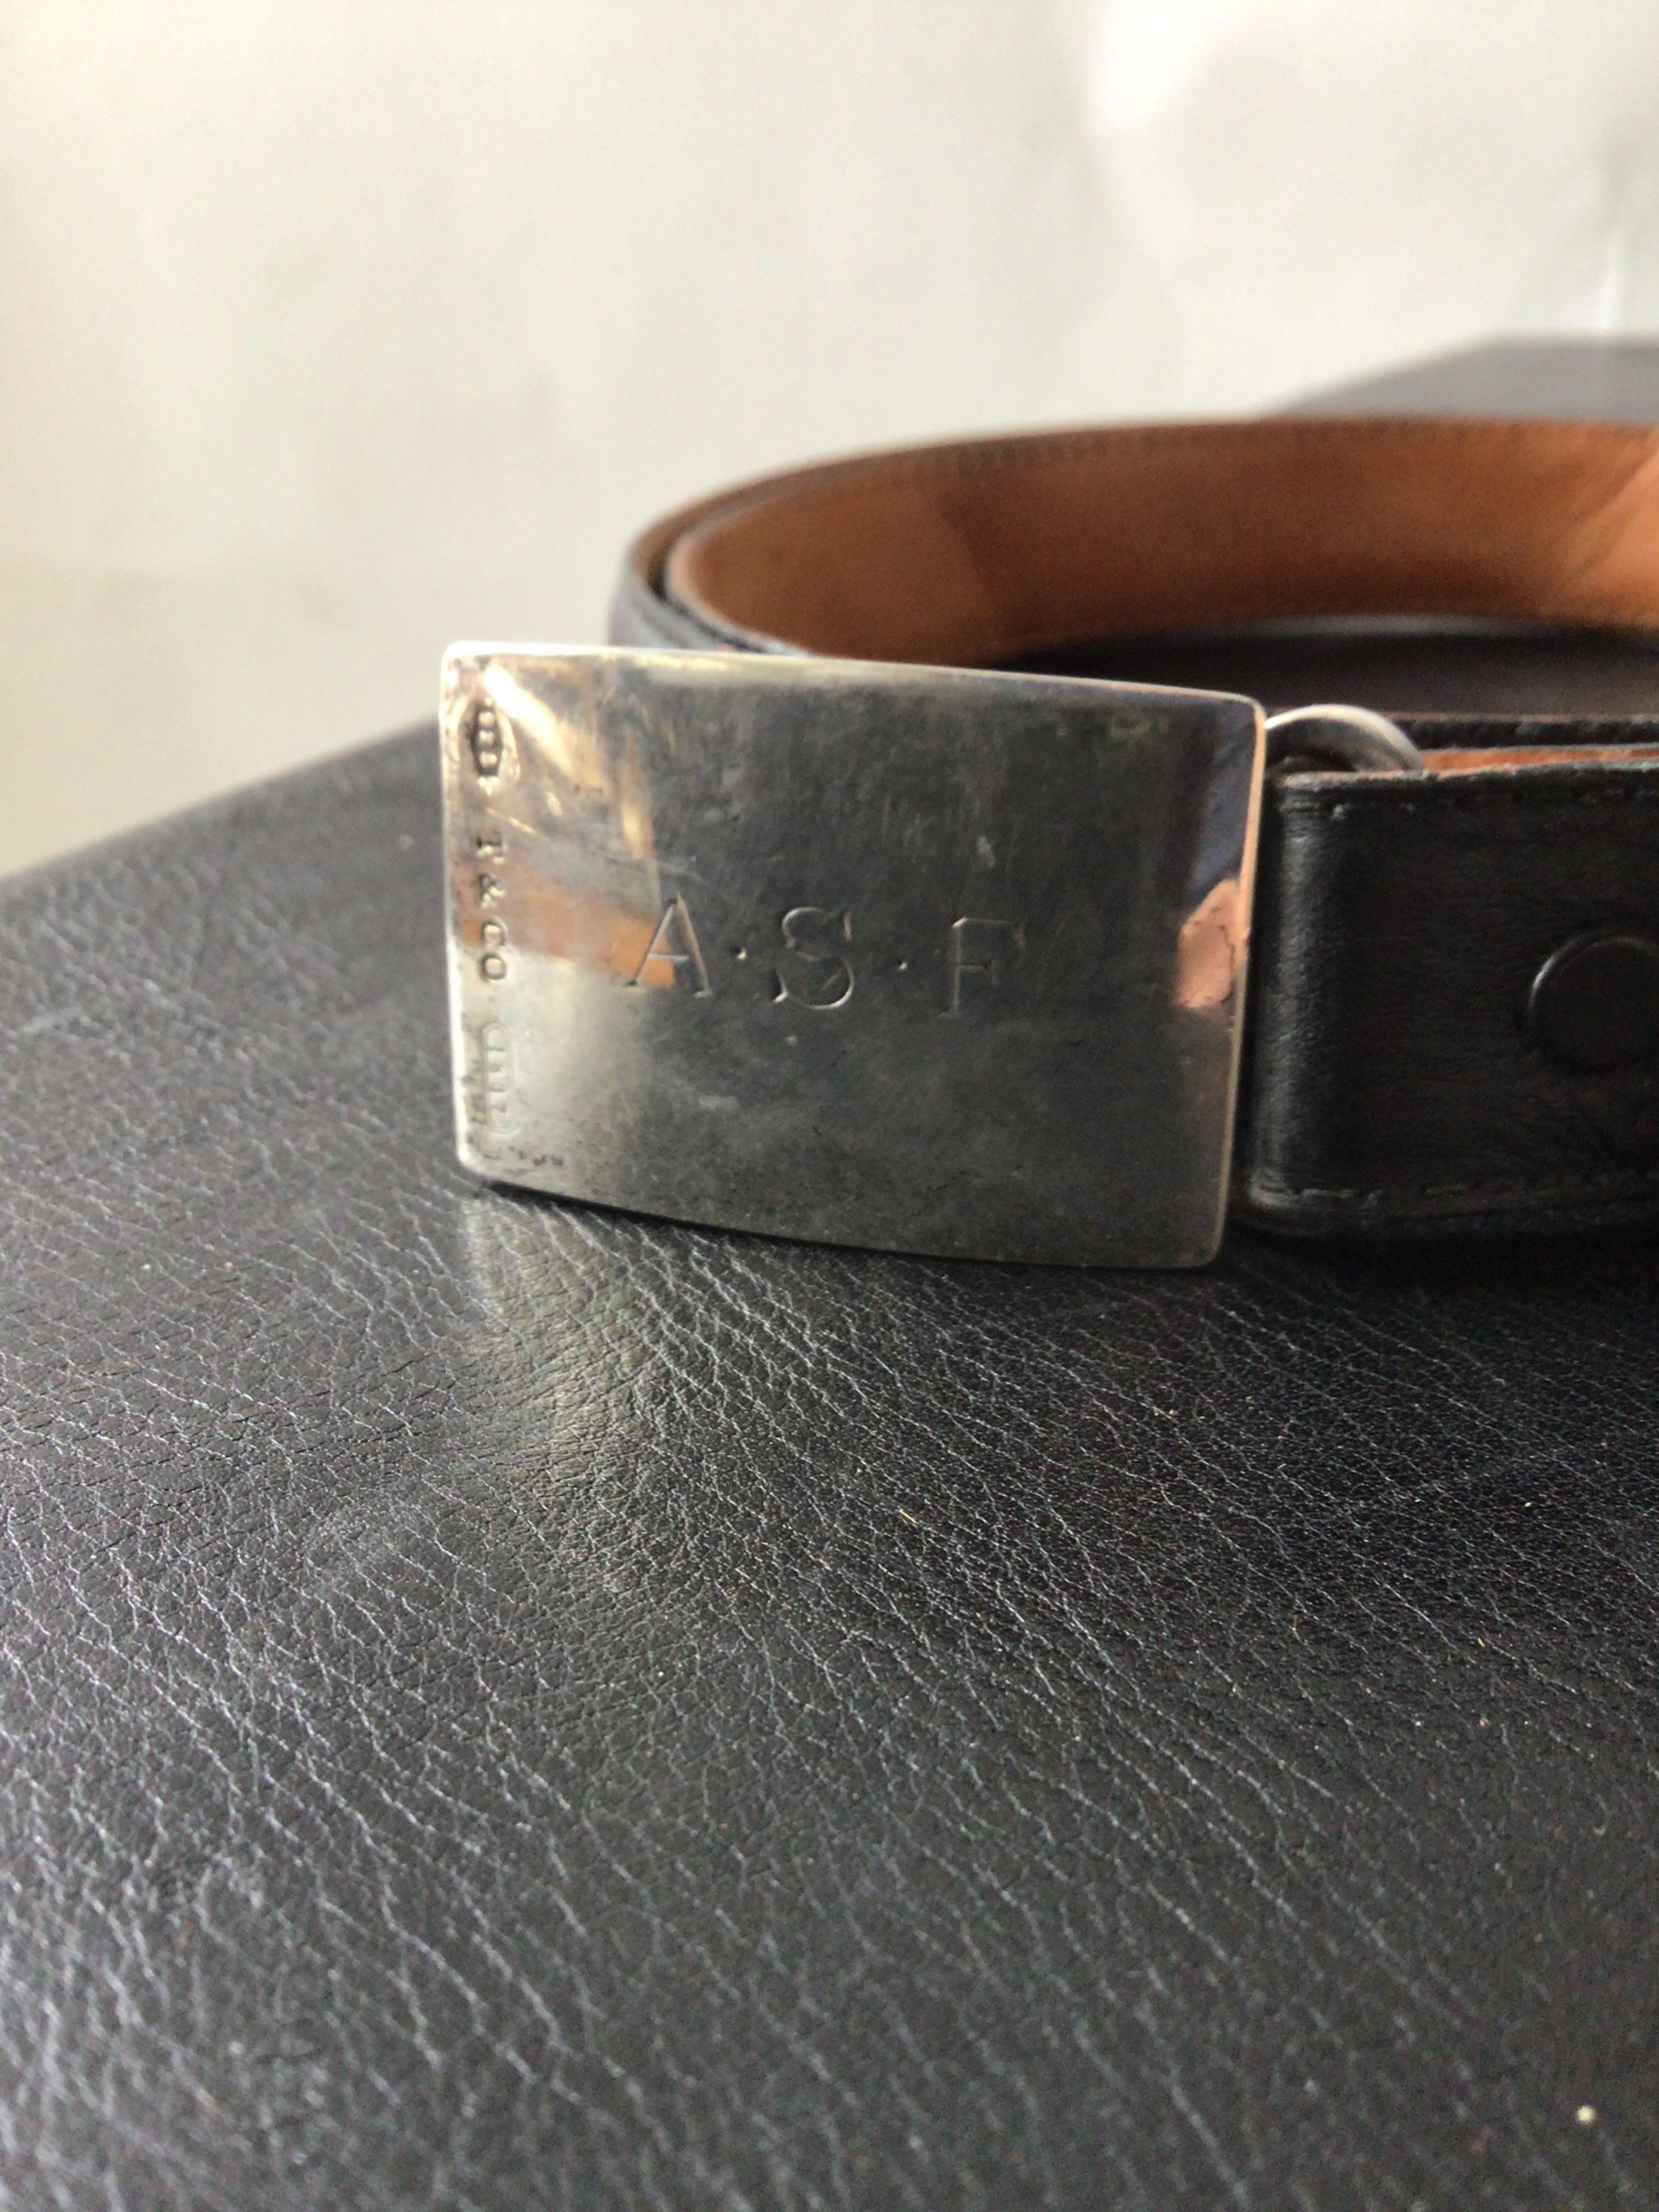 Tiffany sterling buckle on a black leather belt. Both marked Tiffany. Size 34.